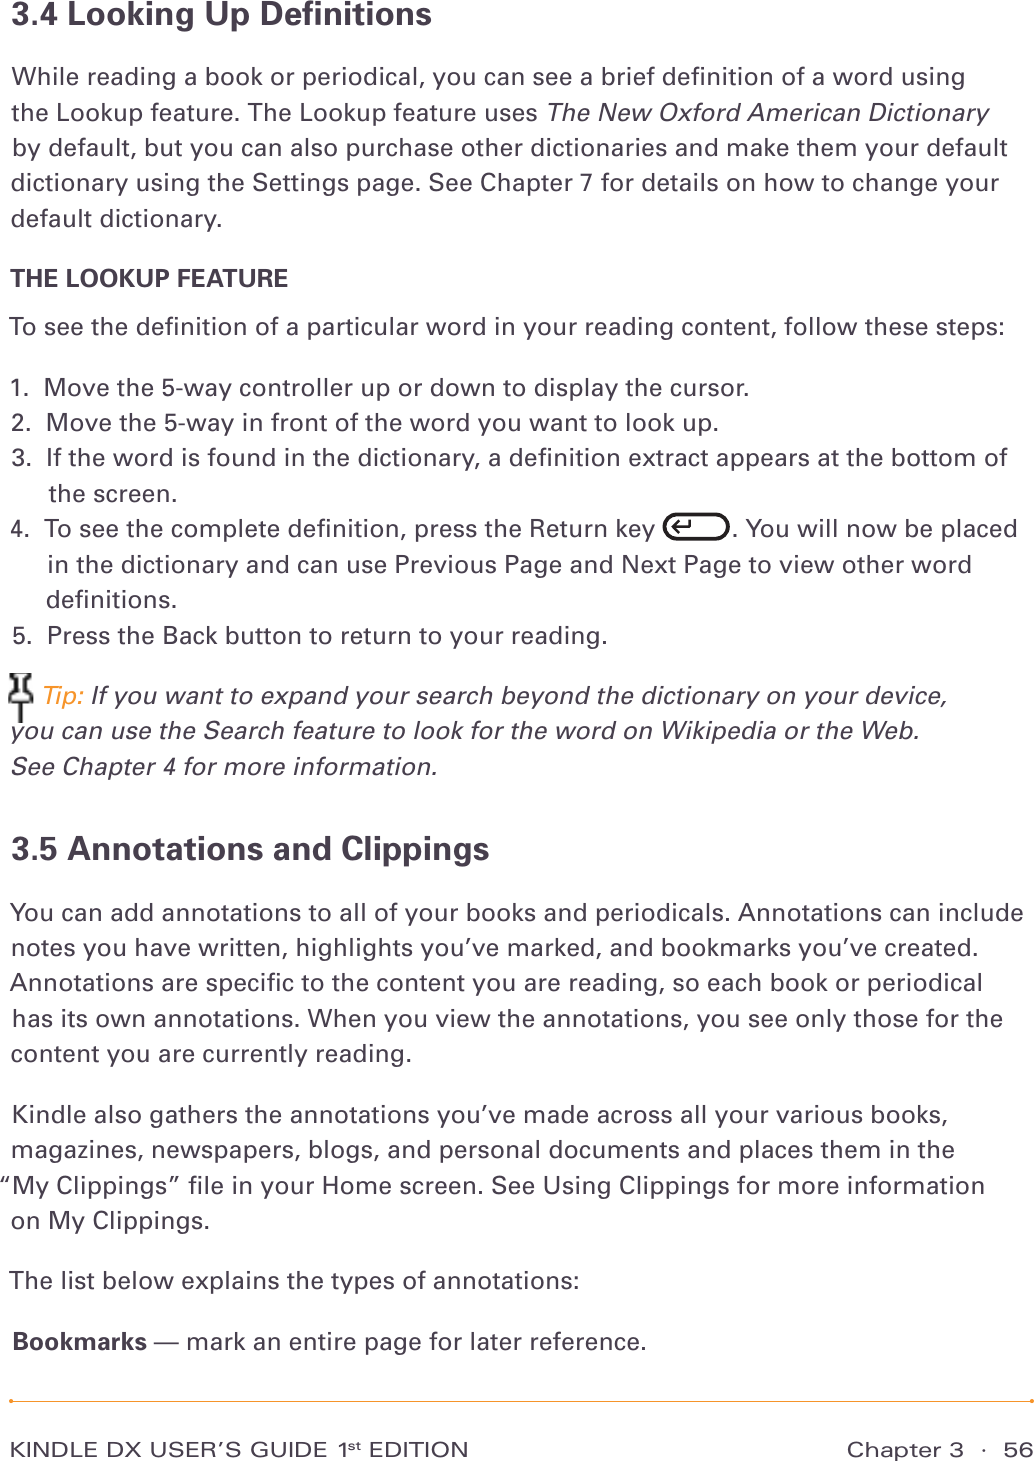 KINDLE DX USER’S GUIDE 1st EDITION Chapter 3  ·  563.4 Looking Up DeﬁnitionsWhile reading a book or periodical, you can see a brief deﬁnition of a word using the Lookup feature. The Lookup feature uses The New Oxford American Dictionary by default, but you can also purchase other dictionaries and make them your default dictionary using the Settings page. See Chapter 7 for details on how to change your default dictionary.THE LOOKUP FEATURETo see the deﬁnition of a particular word in your reading content, follow these steps:1.  Move the 5-way controller up or down to display the cursor. 2.  Move the 5-way in front of the word you want to look up. 3.   If the word is found in the dictionary, a deﬁnition extract appears at the bottom of the screen. 4.   To see the complete deﬁnition, press the Return key  . You will now be placed in the dictionary and can use Previous Page and Next Page to view other word deﬁnitions. 5.  Press the Back button to return to your reading.  Tip: If you want to expand your search beyond the dictionary on your device, you can use the Search feature to look for the word on Wikipedia or the Web.  See Chapter 4 for more information.3.5 Annotations and ClippingsYou can add annotations to all of your books and periodicals. Annotations can include notes you have written, highlights you’ve marked, and bookmarks you’ve created. Annotations are speciﬁc to the content you are reading, so each book or periodical has its own annotations. When you view the annotations, you see only those for the content you are currently reading.Kindle also gathers the annotations you’ve made across all your various books, magazines, newspapers, blogs, and personal documents and places them in the  “My Clippings” ﬁle in your Home screen. See Using Clippings for more information  on My Clippings.The list below explains the types of annotations:Bookmarks — mark an entire page for later reference.